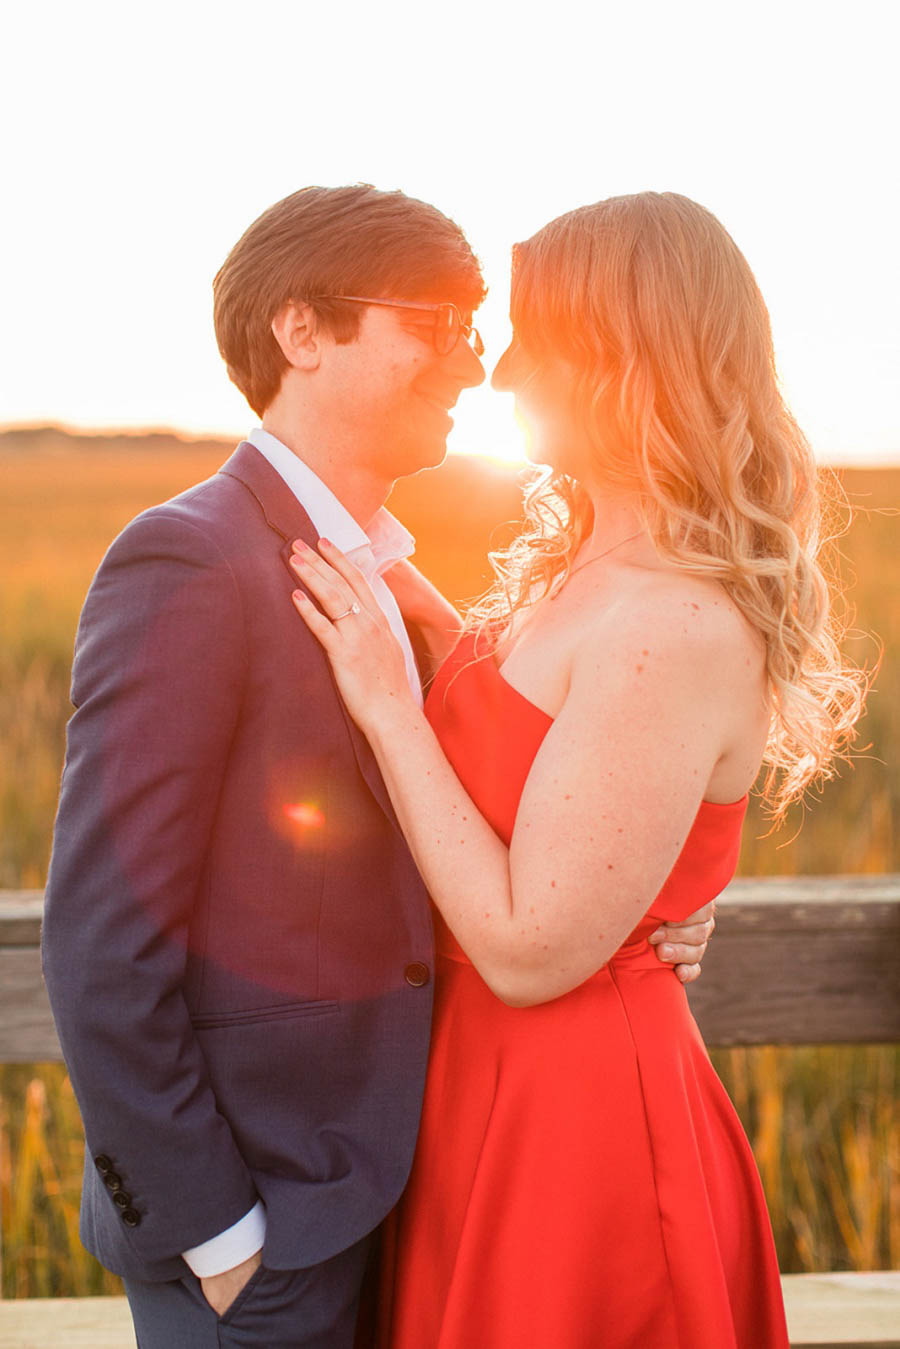 Beach engagement photo by Hamptons wedding photographer Amy Rizzuto Photography. Gorgeous Hamptons engagement photo at sunset.